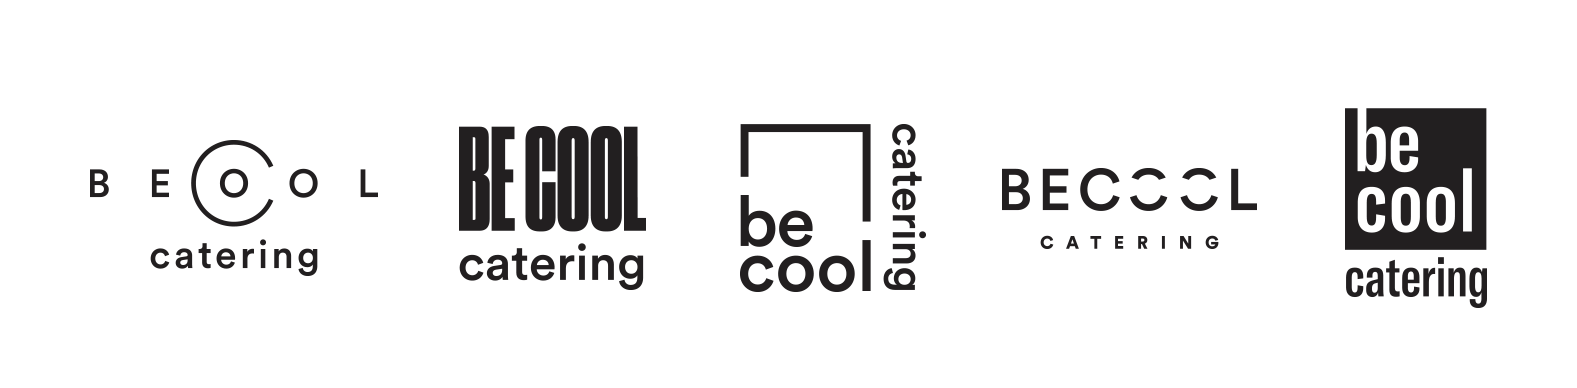 be cool catering návrhy loga